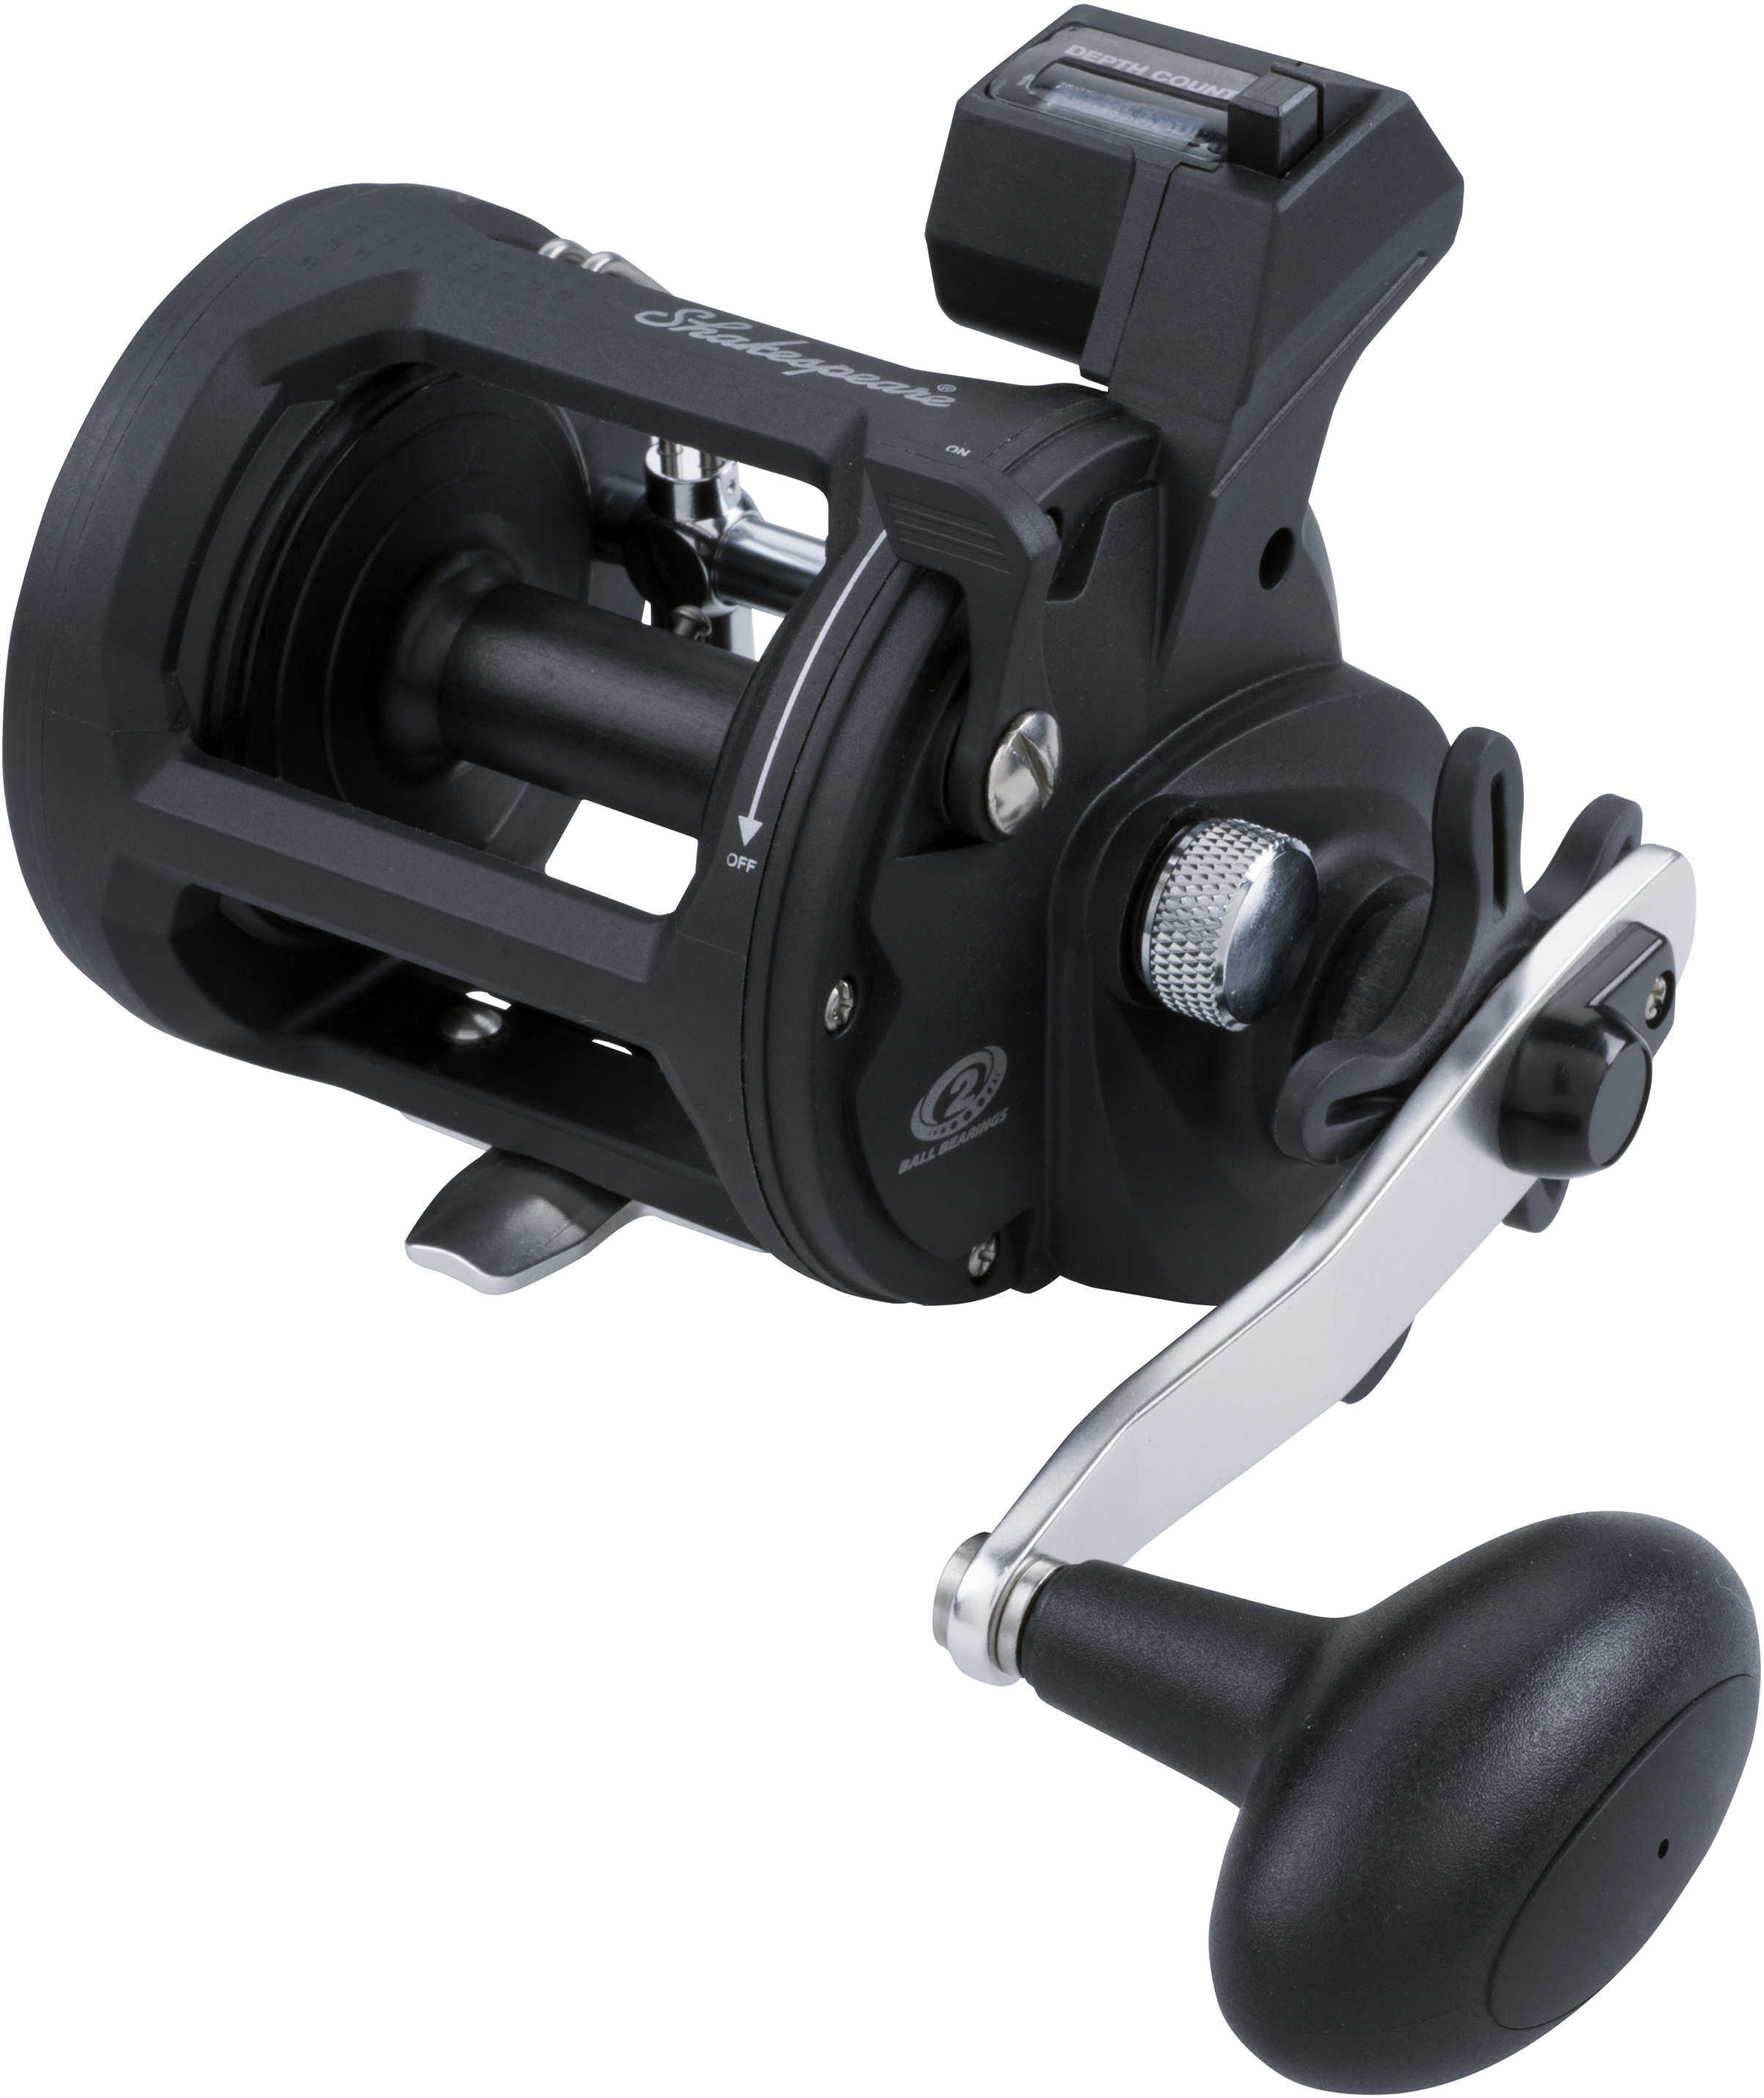 Shakespeare ATS Reels 6.3:1 Gear Ratio, 2 Bearings, 400/20 Capacity, Line Counter, Boxed Md: 1366926